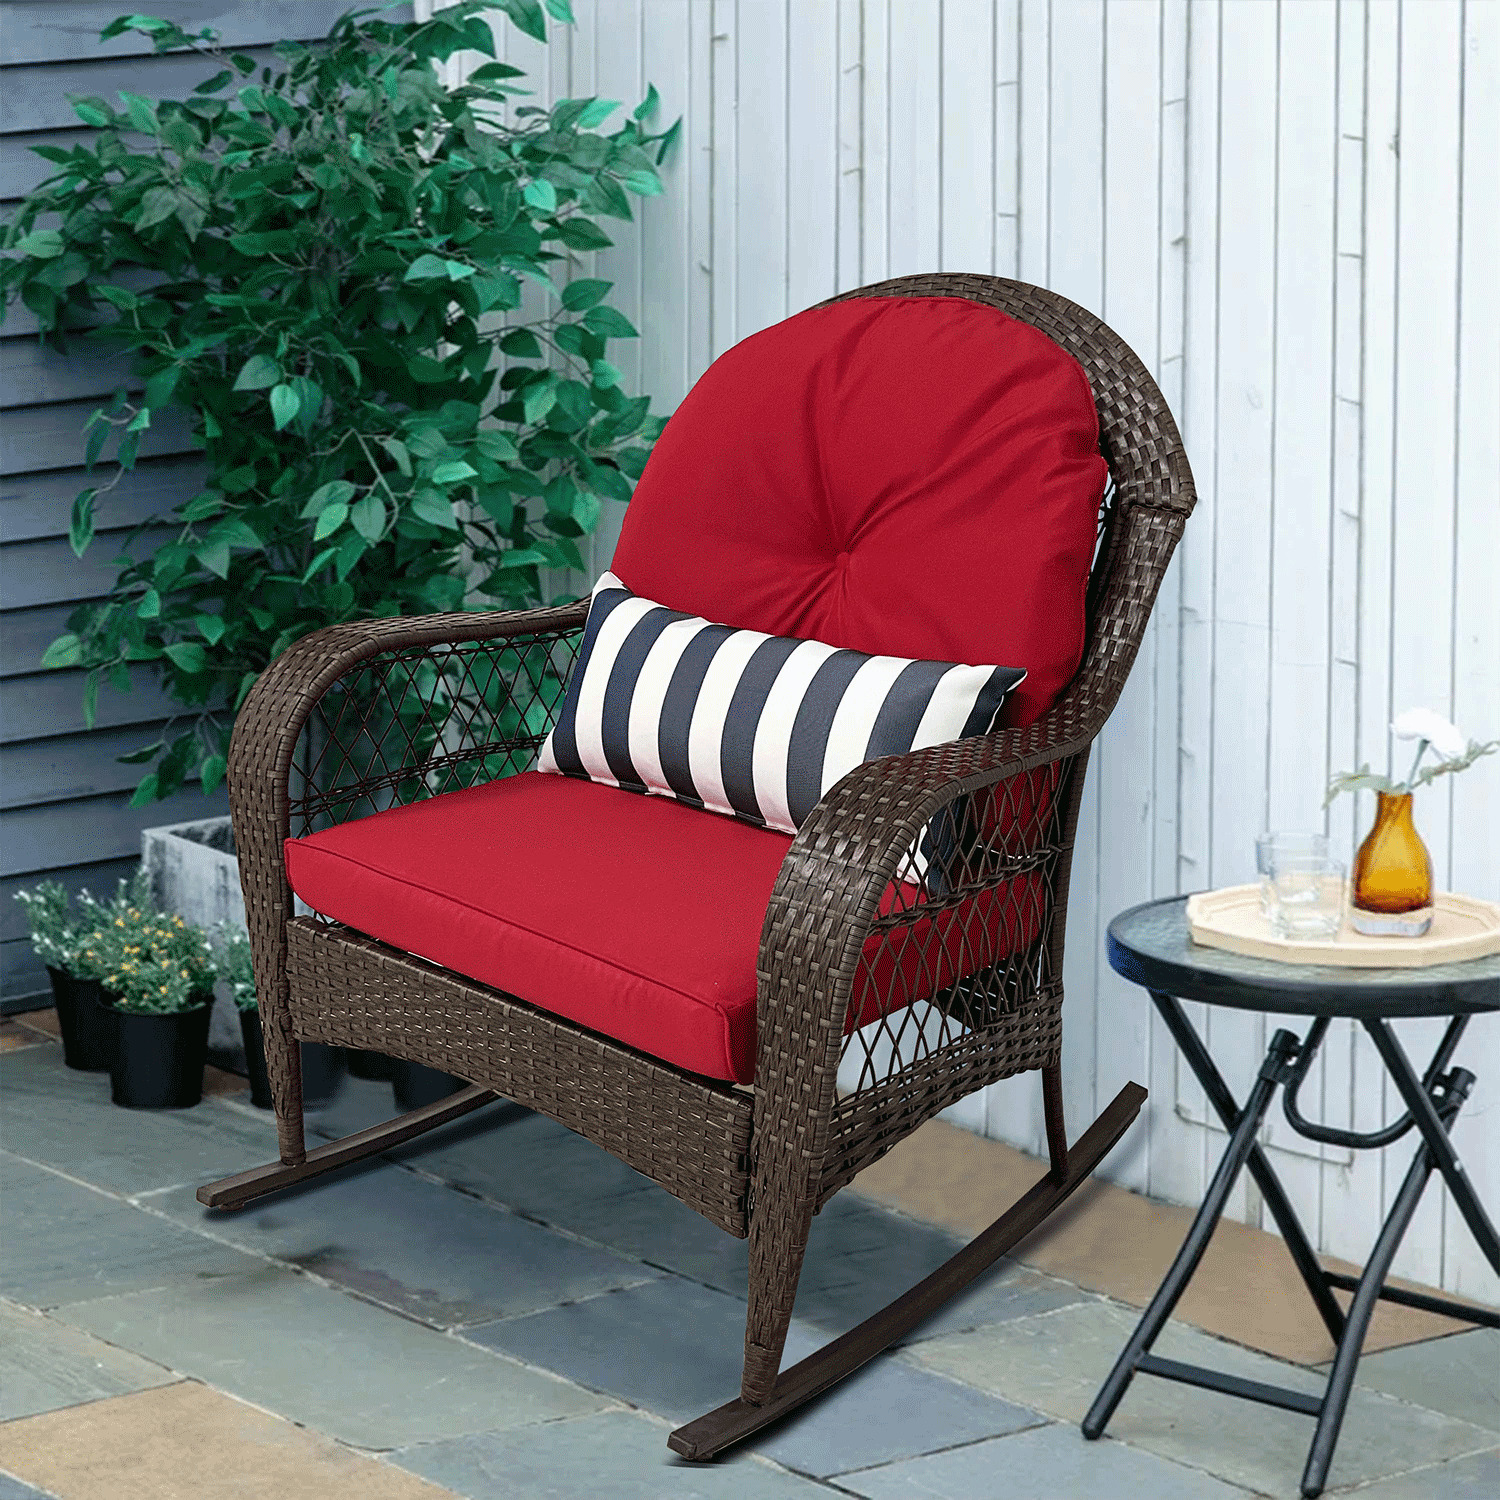 Outdoor rattan rocking chair with red cushions